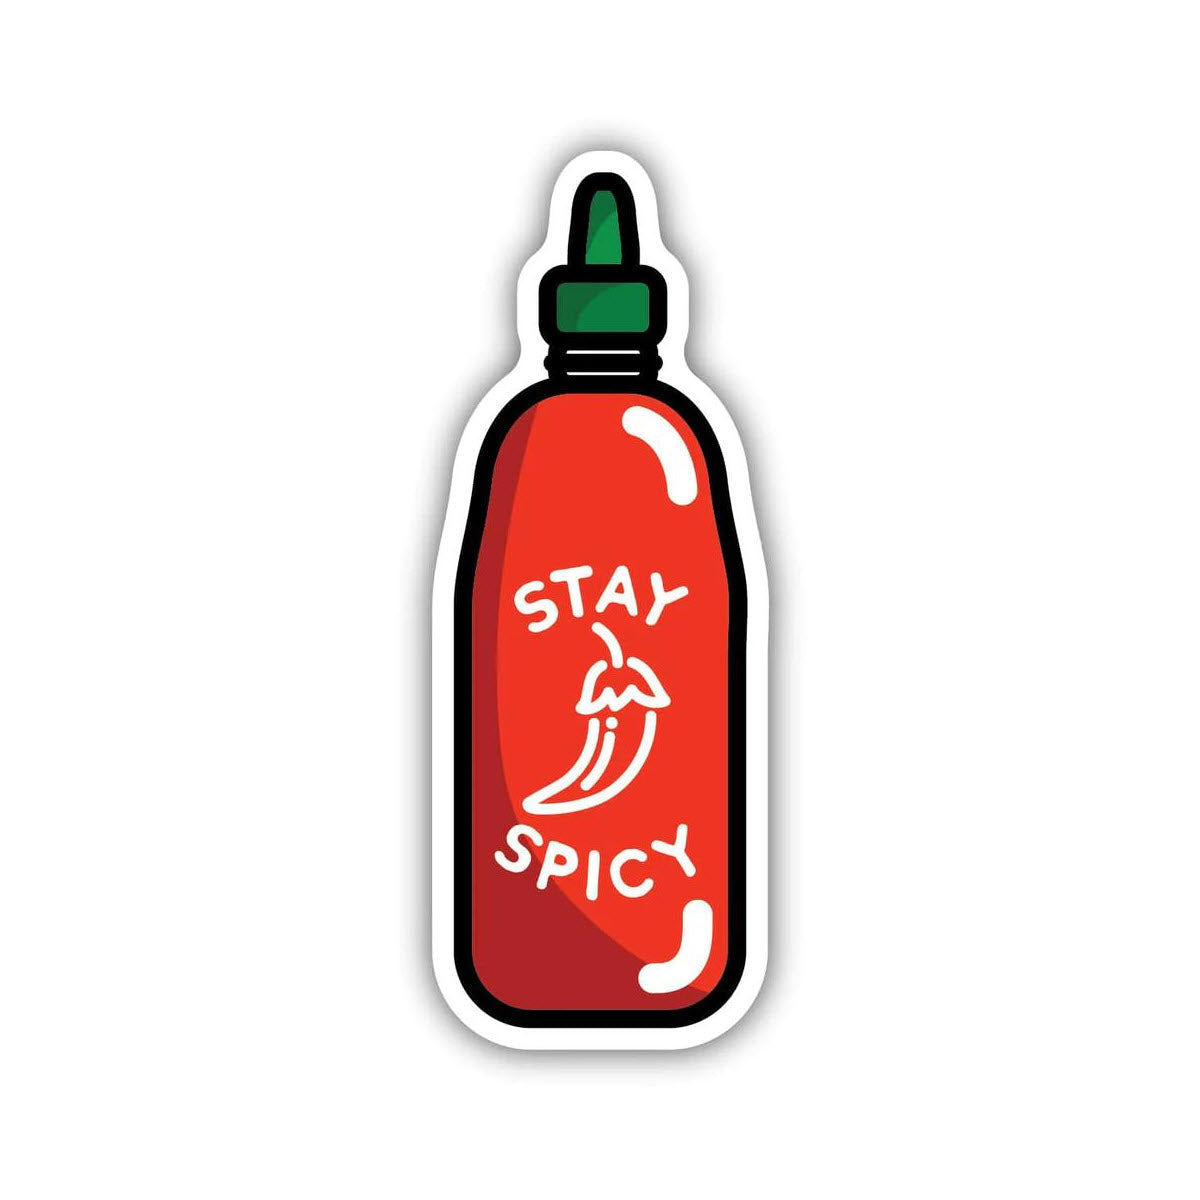 Sticker of a weatherproof Stickers Northwest Stay Spicy hot sauce bottle with the phrase "stay spicy" and a chili pepper illustration on it, outlined with a white border.